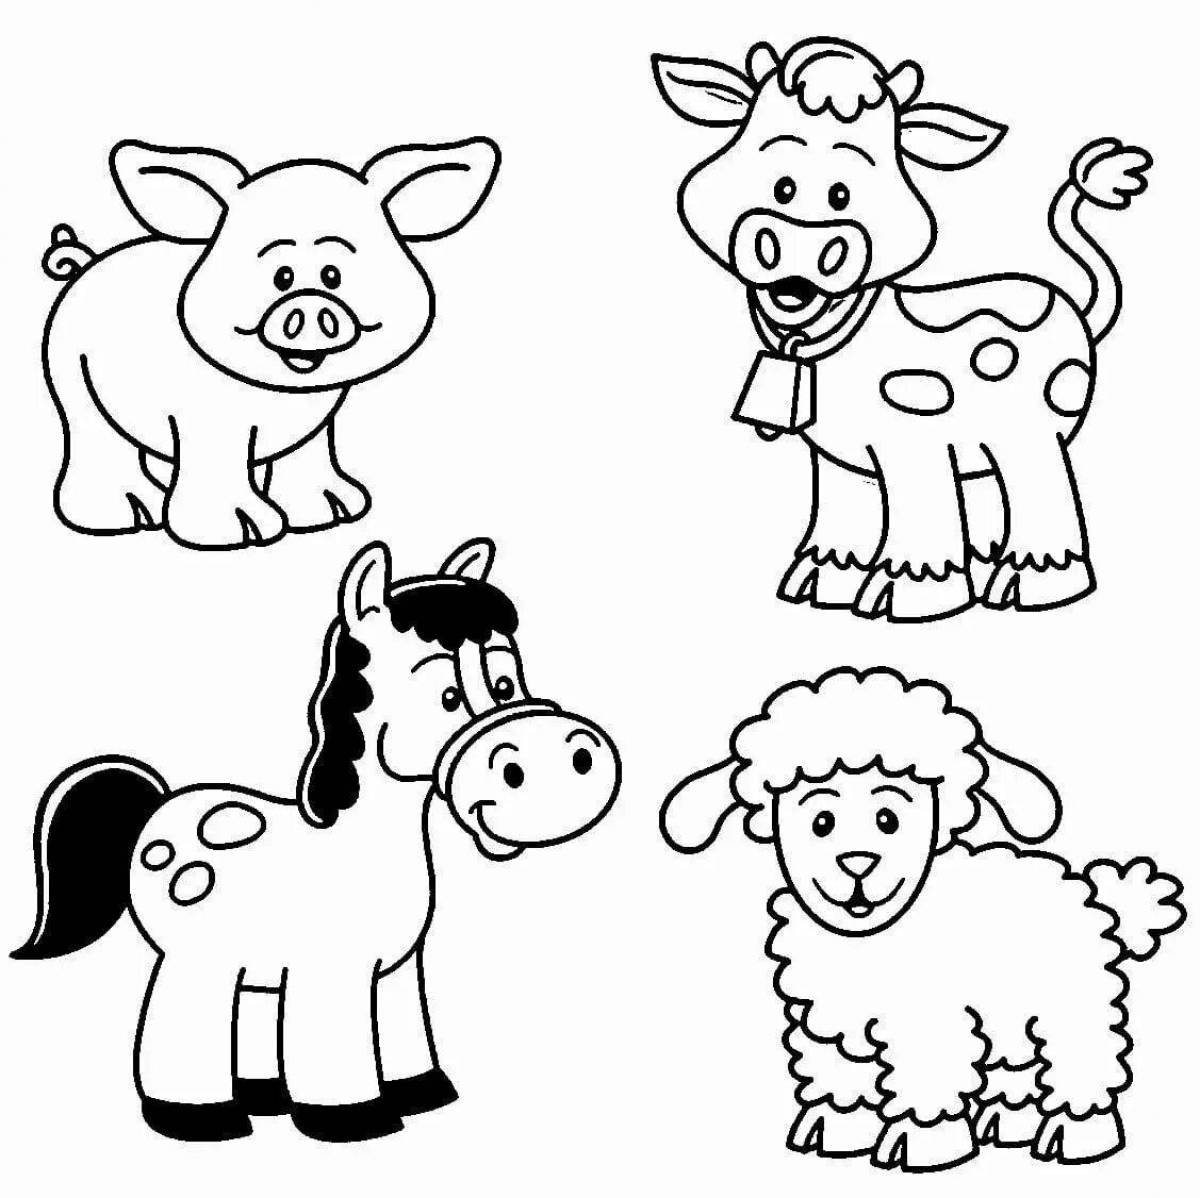 Fun coloring for children 3-4 years old: simple animals